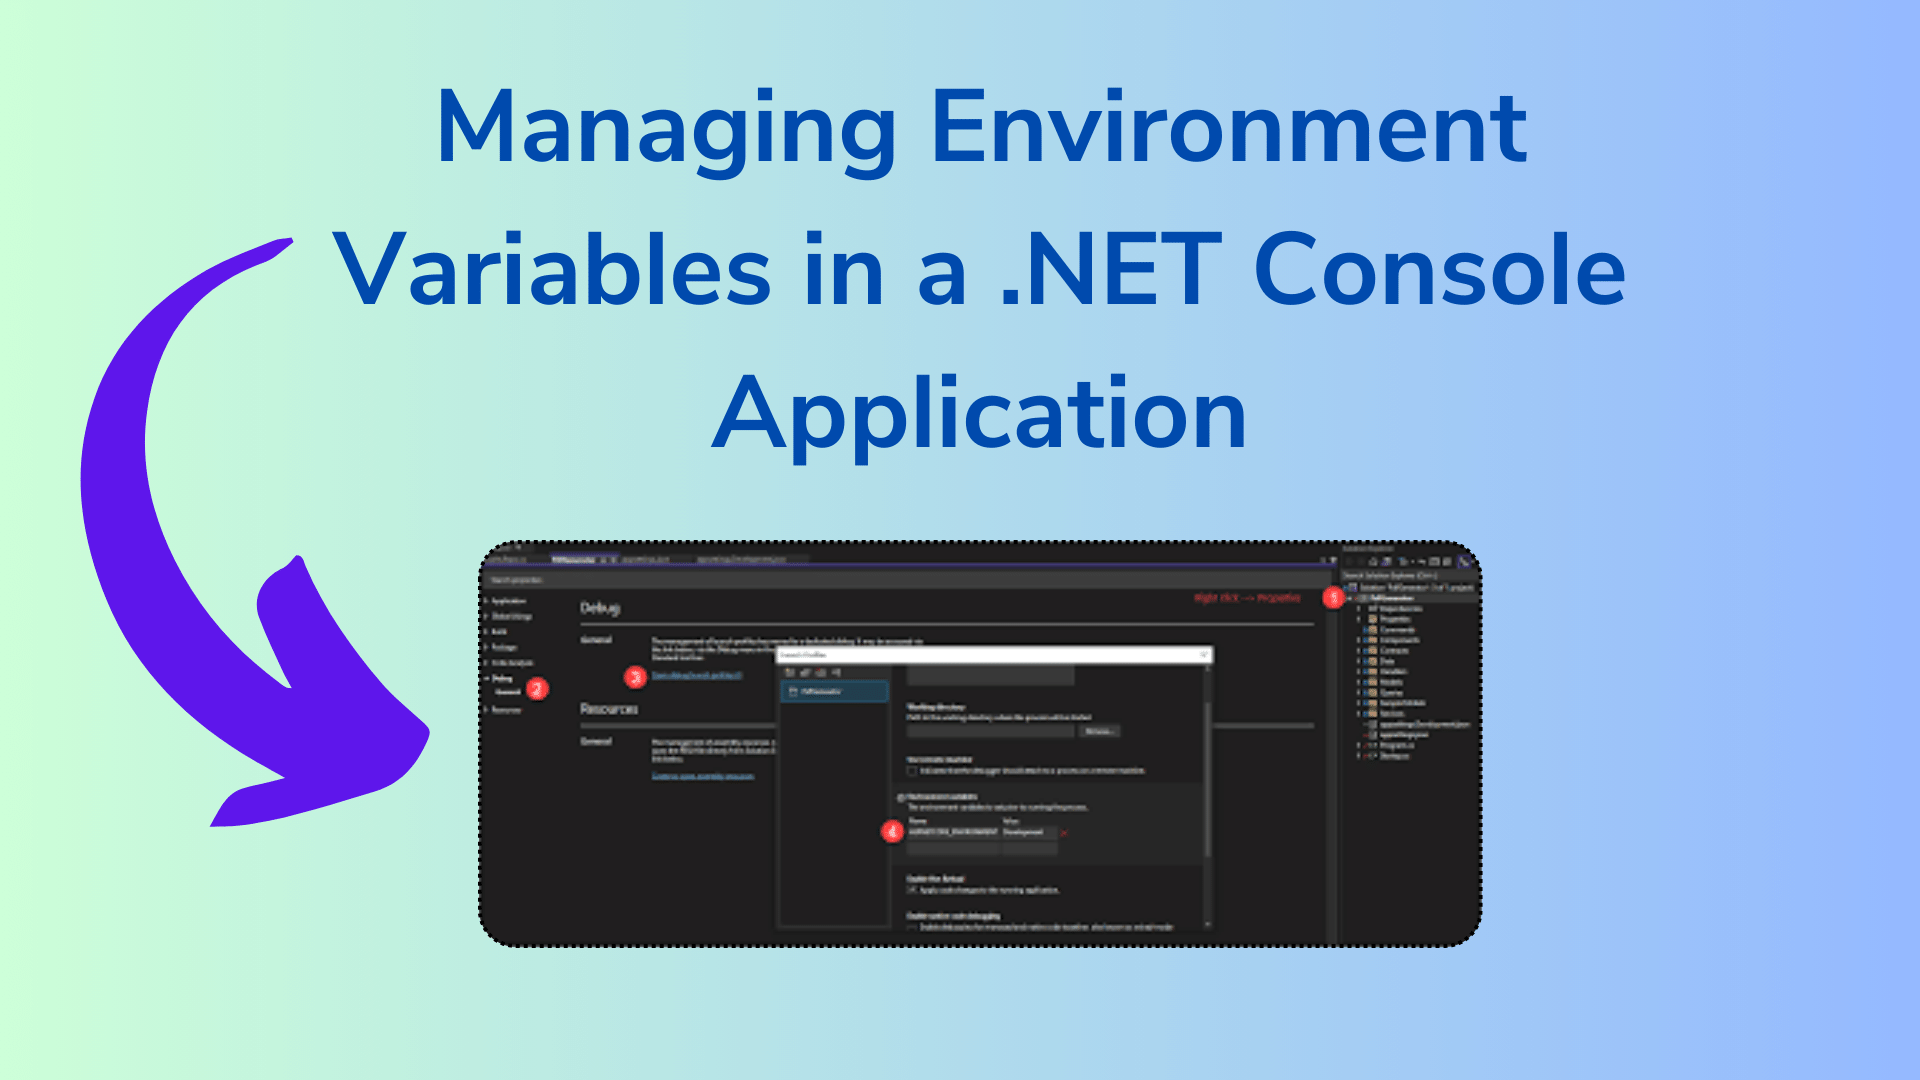 Managing Environment Variables in a .NET Console Application